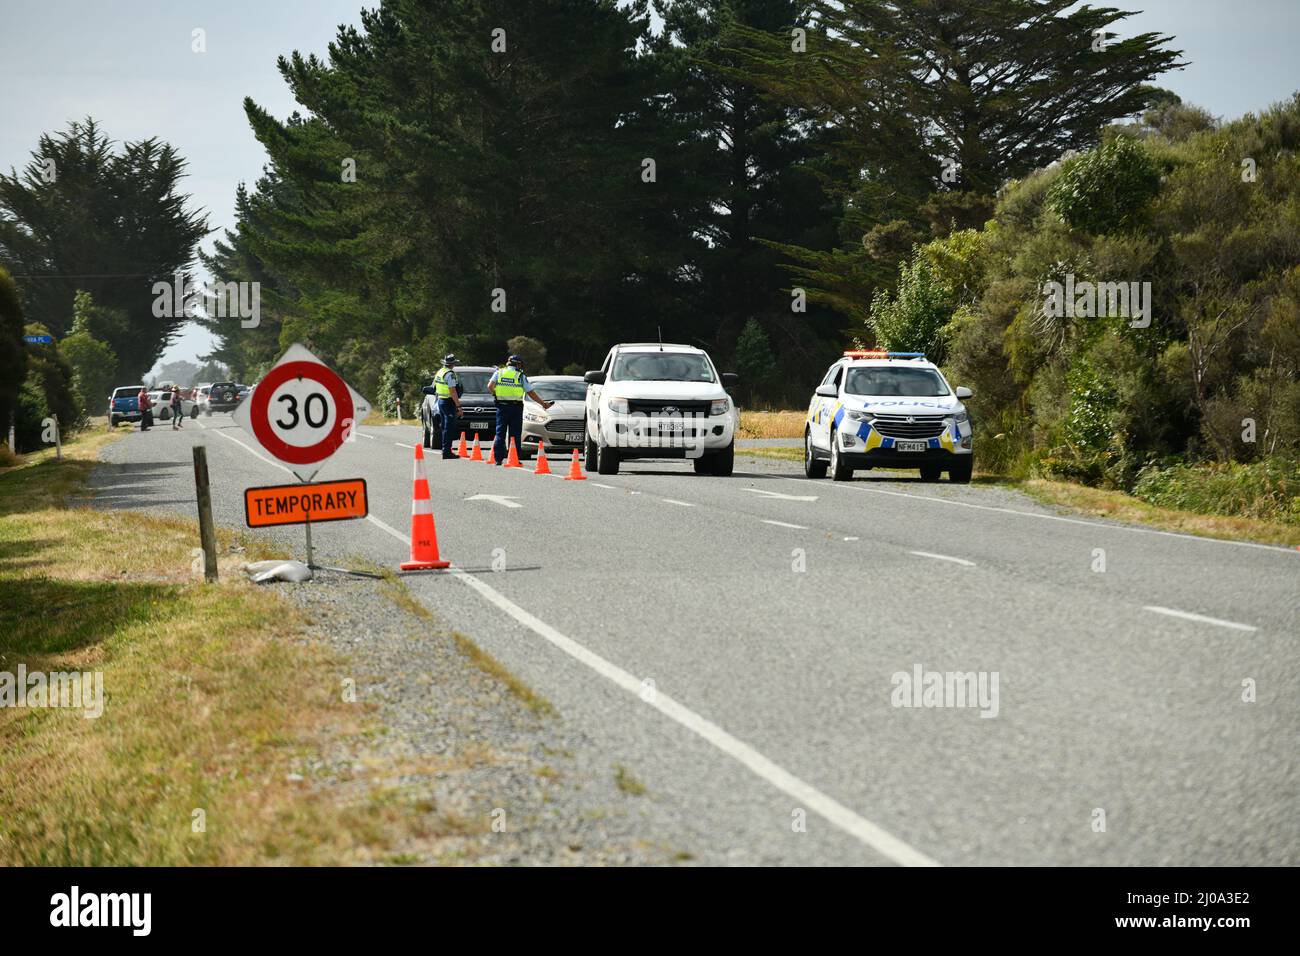 KUMARA, NEW ZEALAND, JANUARY 8, 2022: Police stop vehicles and test for drink drivers at a breathalyser checkpoint on the day of the Kumara race meeting Stock Photo